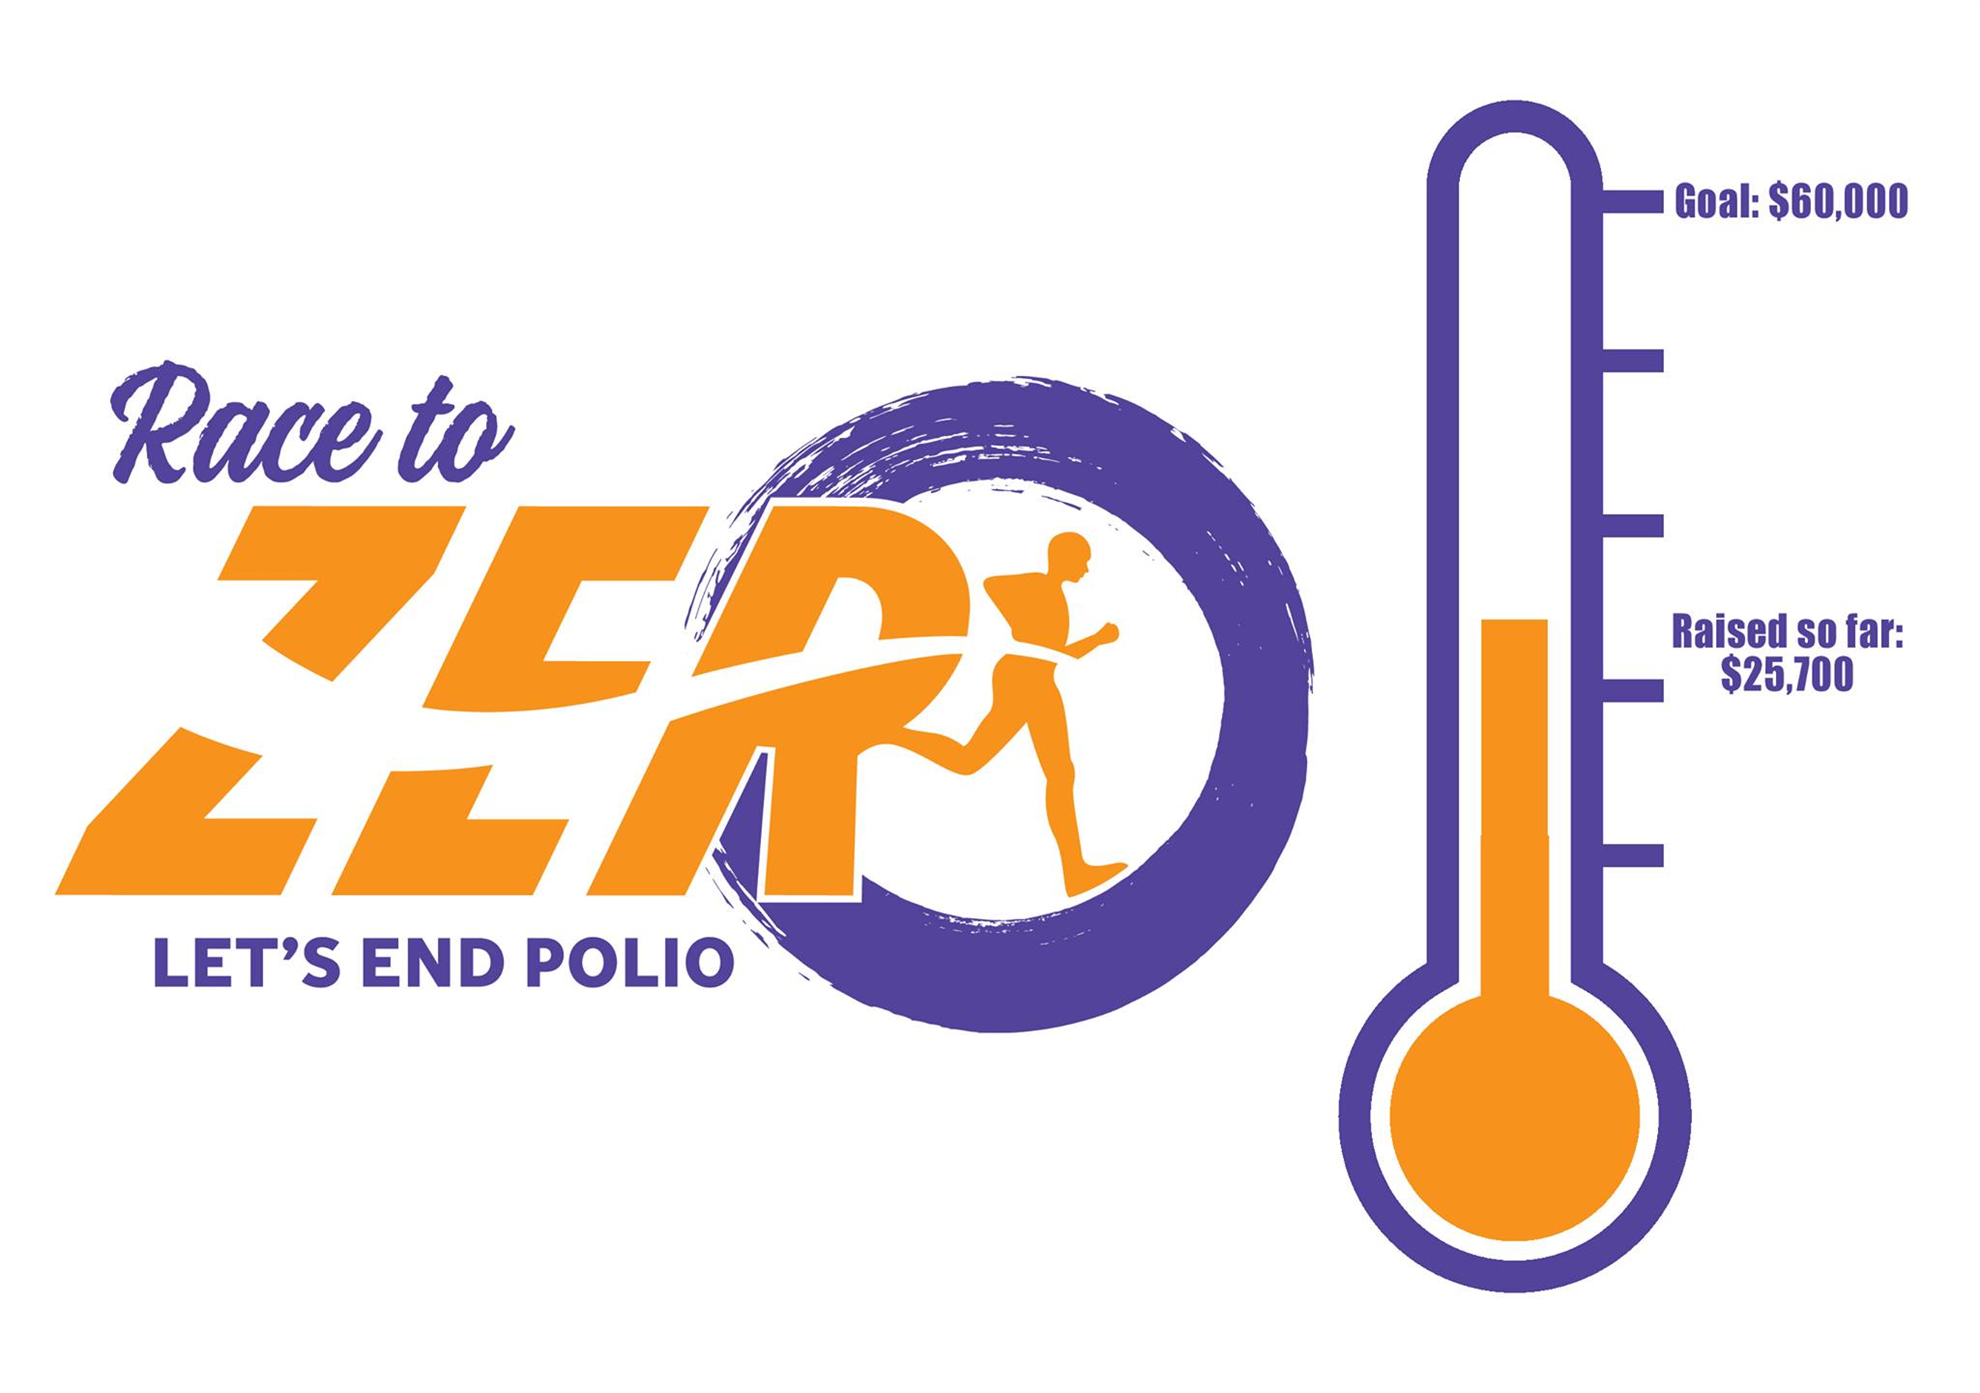 CONTRIBUTE YOUR LUNCH MONEY TO Stop Polio! | Rotary Club of Allentown